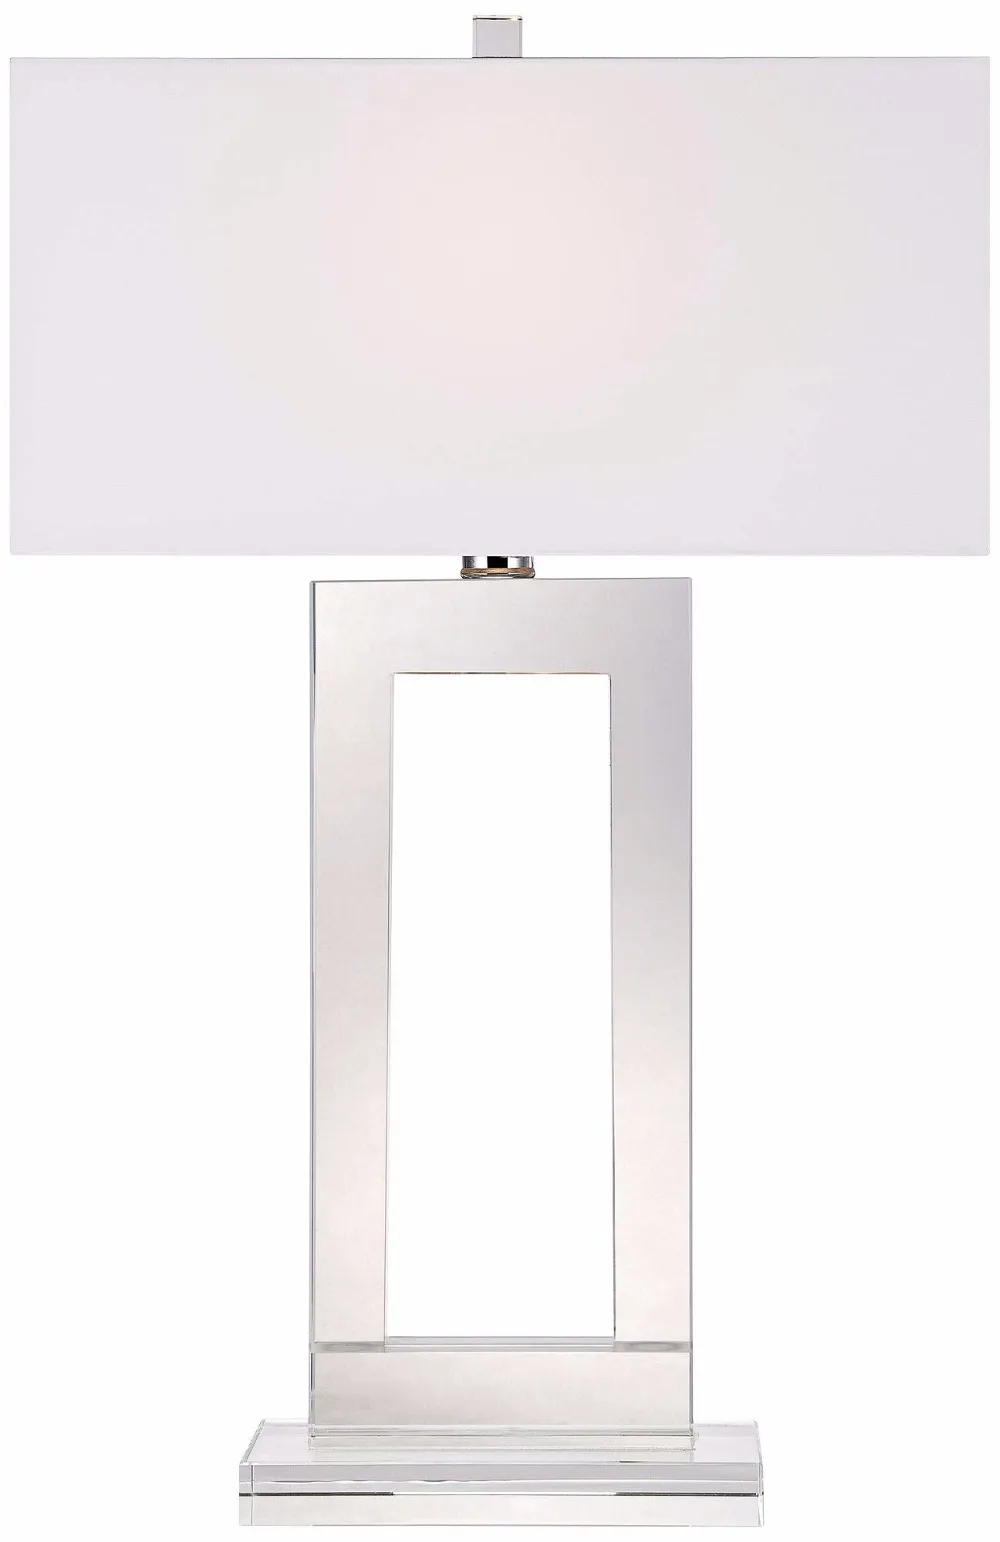 1026-18 a white box shade for a clean, modern look Rectangular in shape Window Modern Crystal Table Lamp